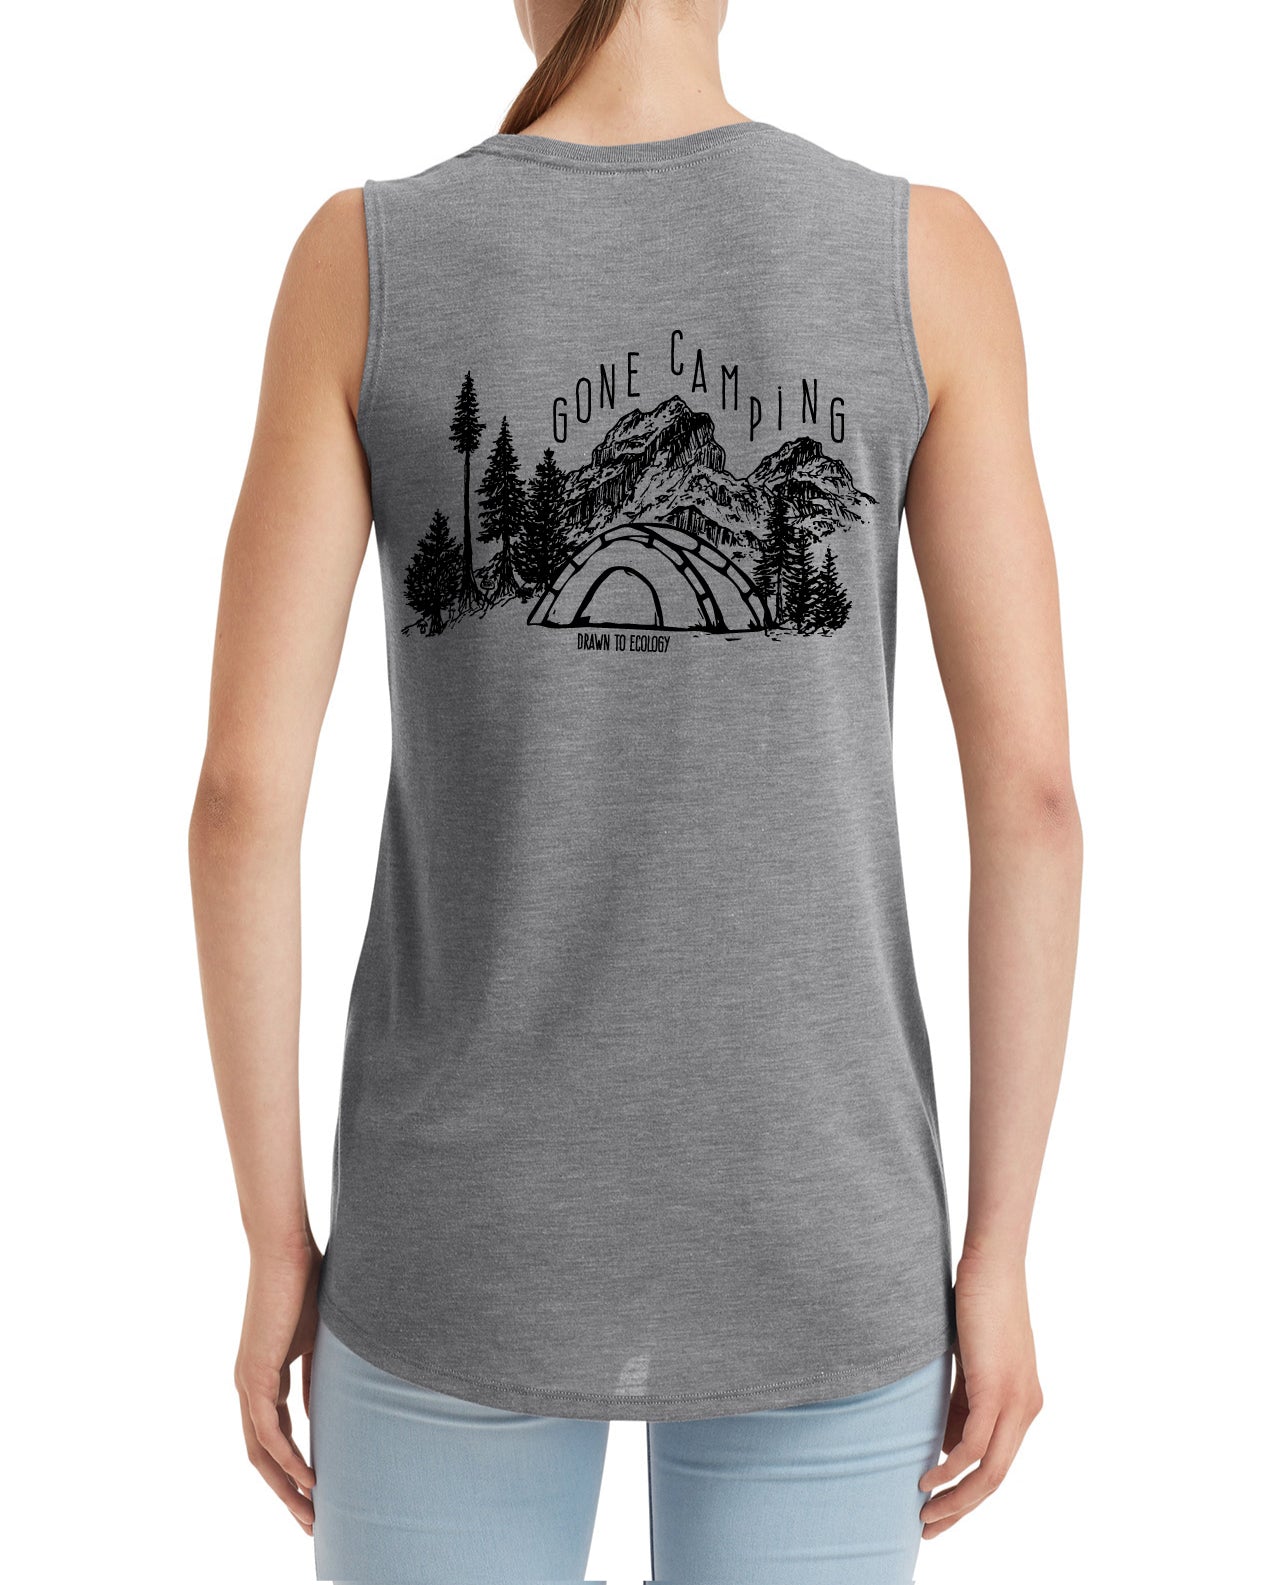 Let's Adventure™ + Gone Camping Tank